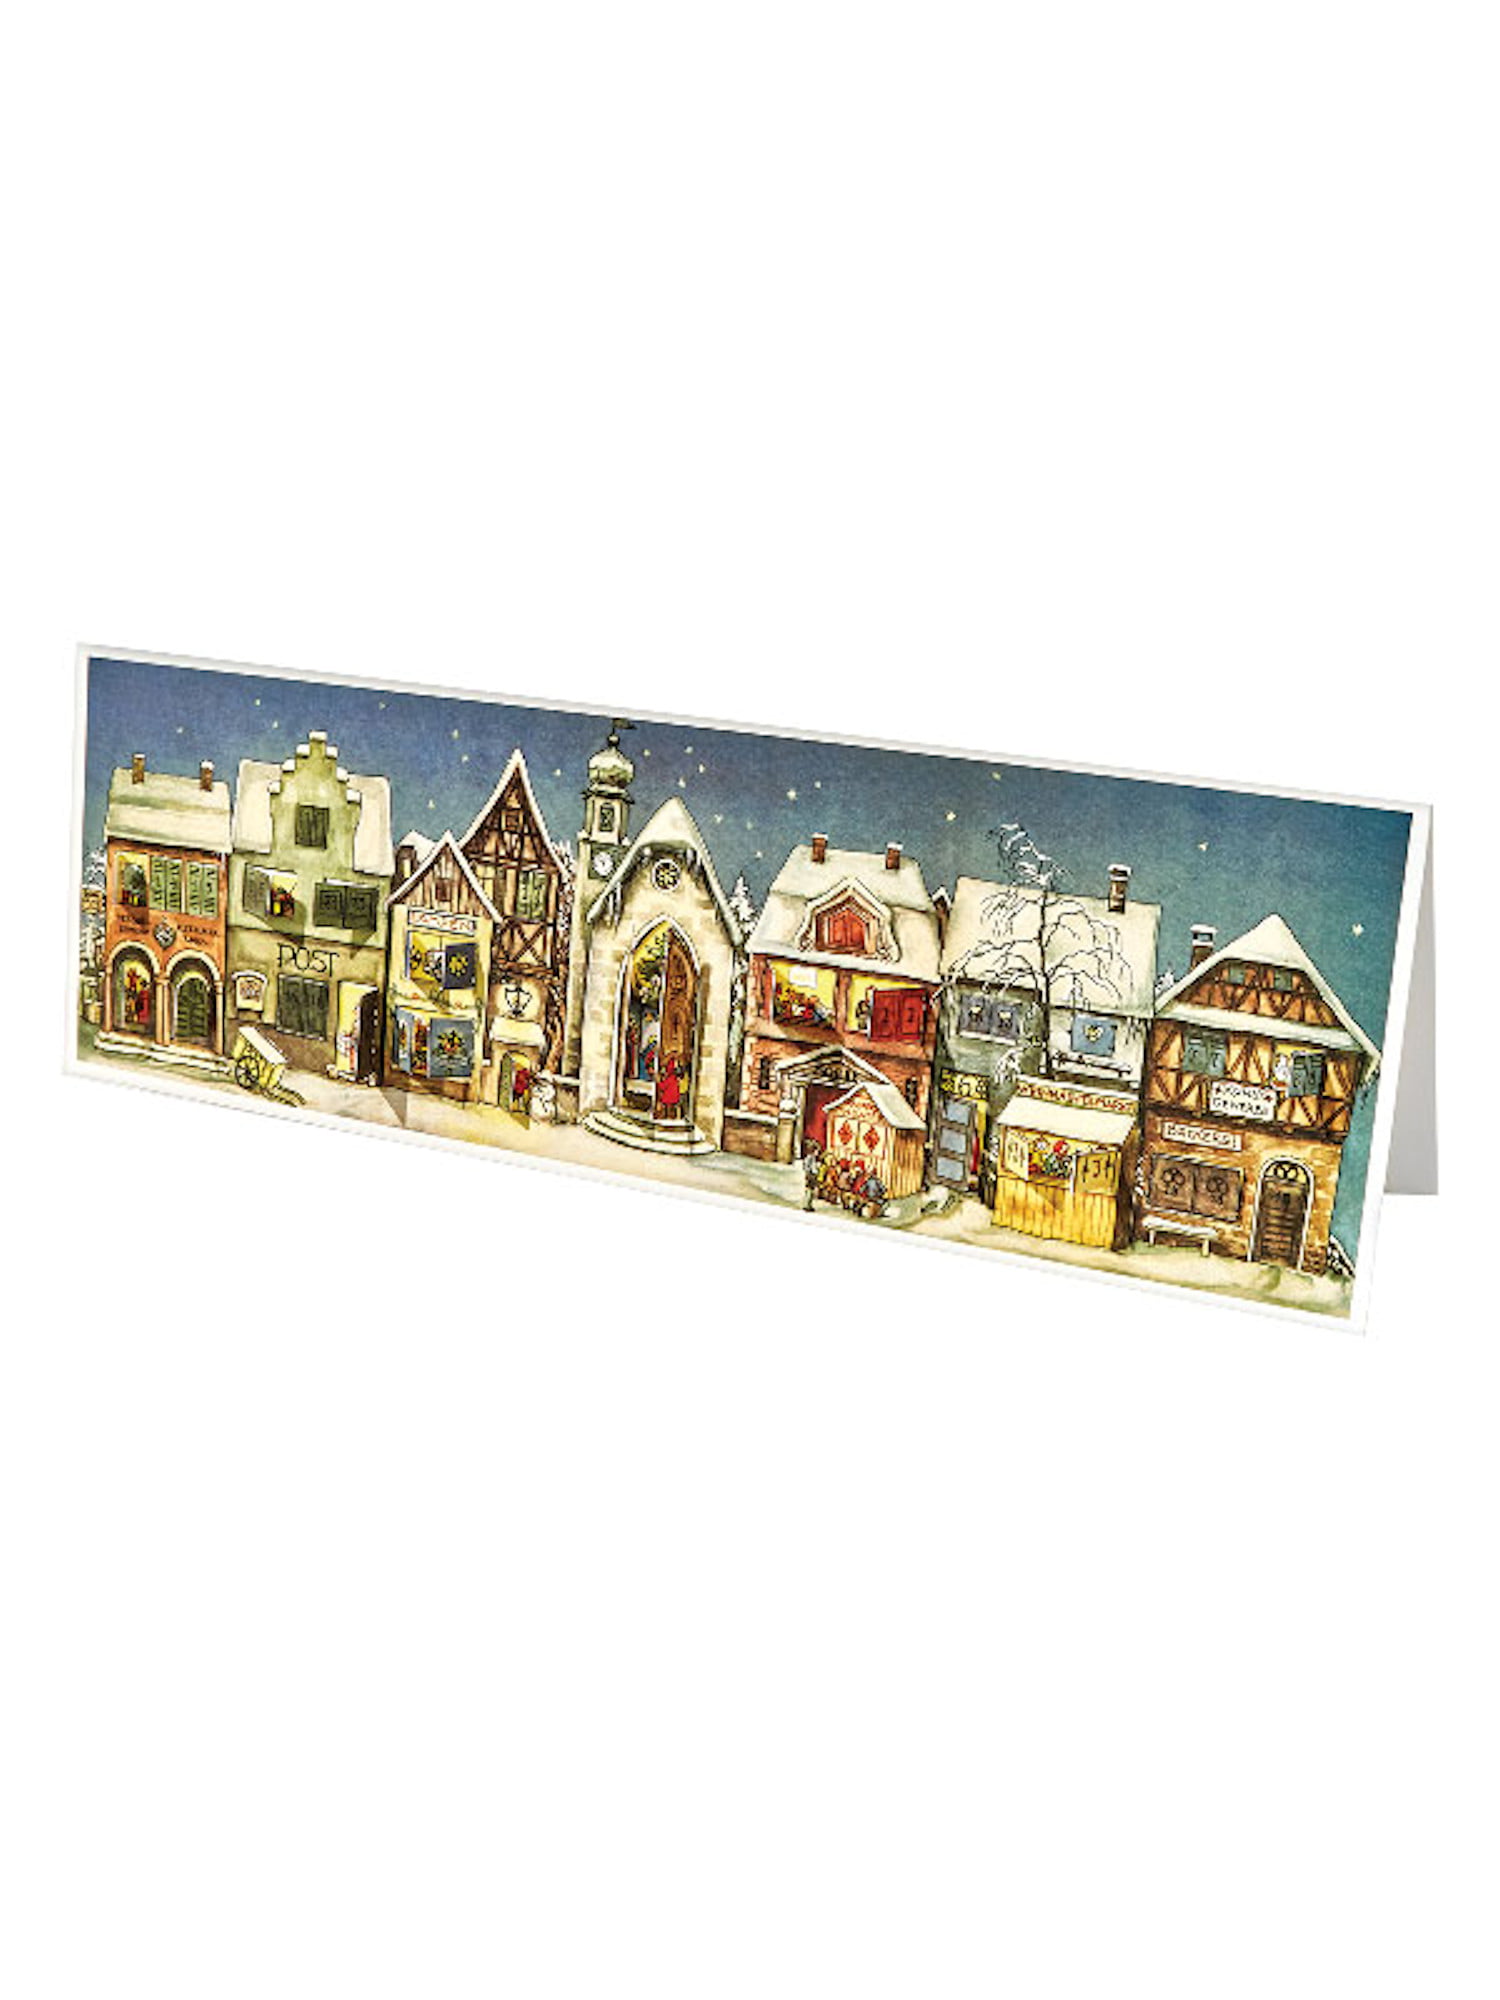 Small Size Richard Sellmer Verlag Little Town Advent Calendar Panoramic Christmas Count Down Holiday Decor